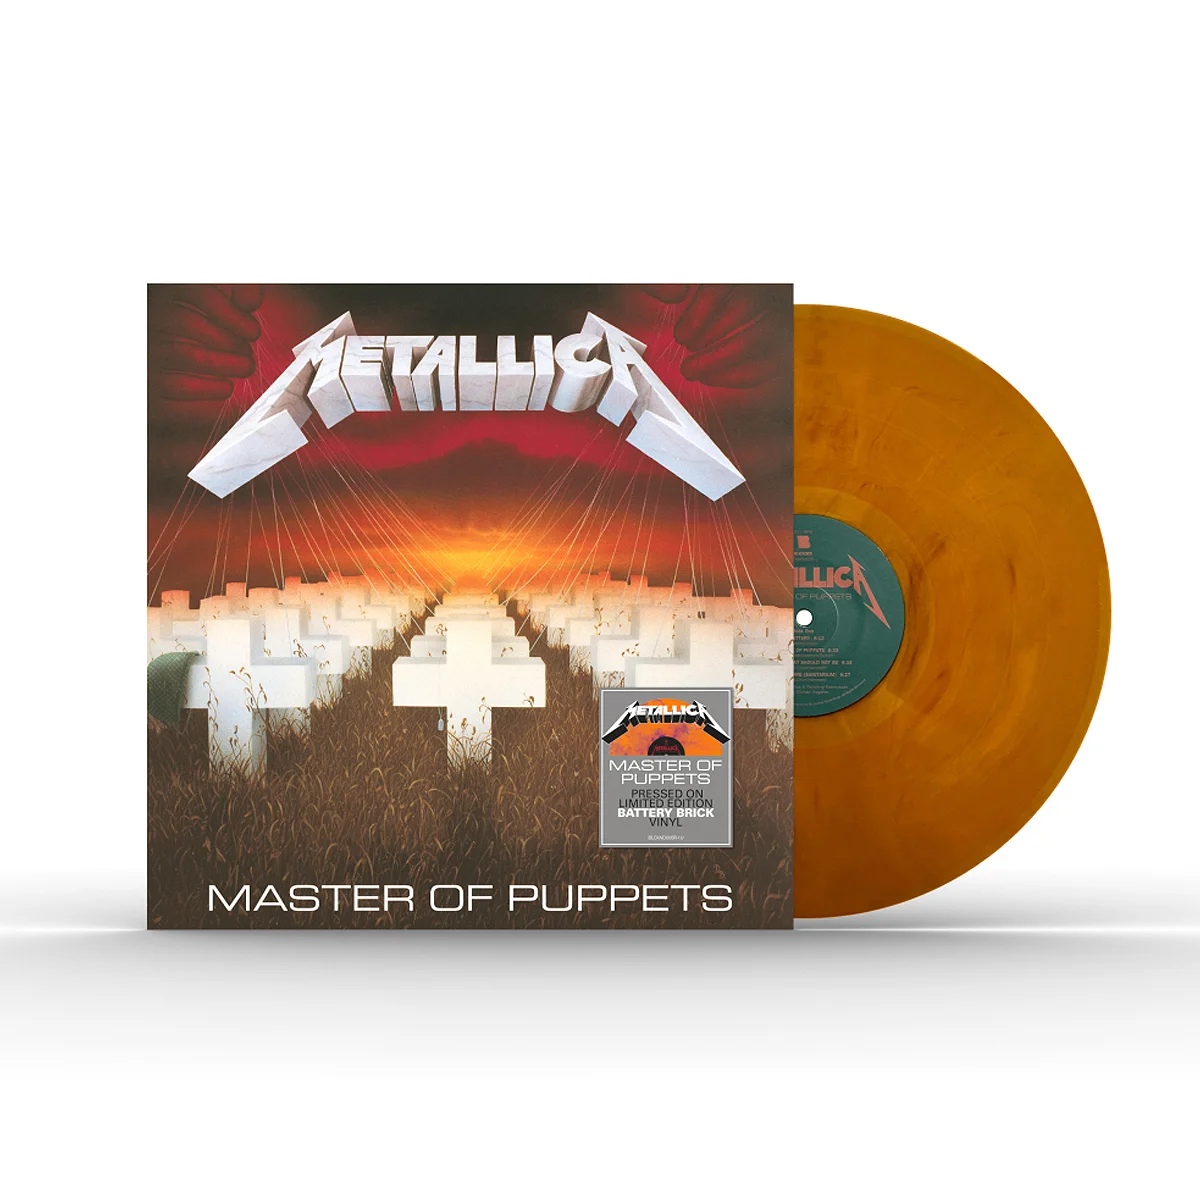 Metallica - Master of Puppets (Limited Edition Battery Brick Vinyl)